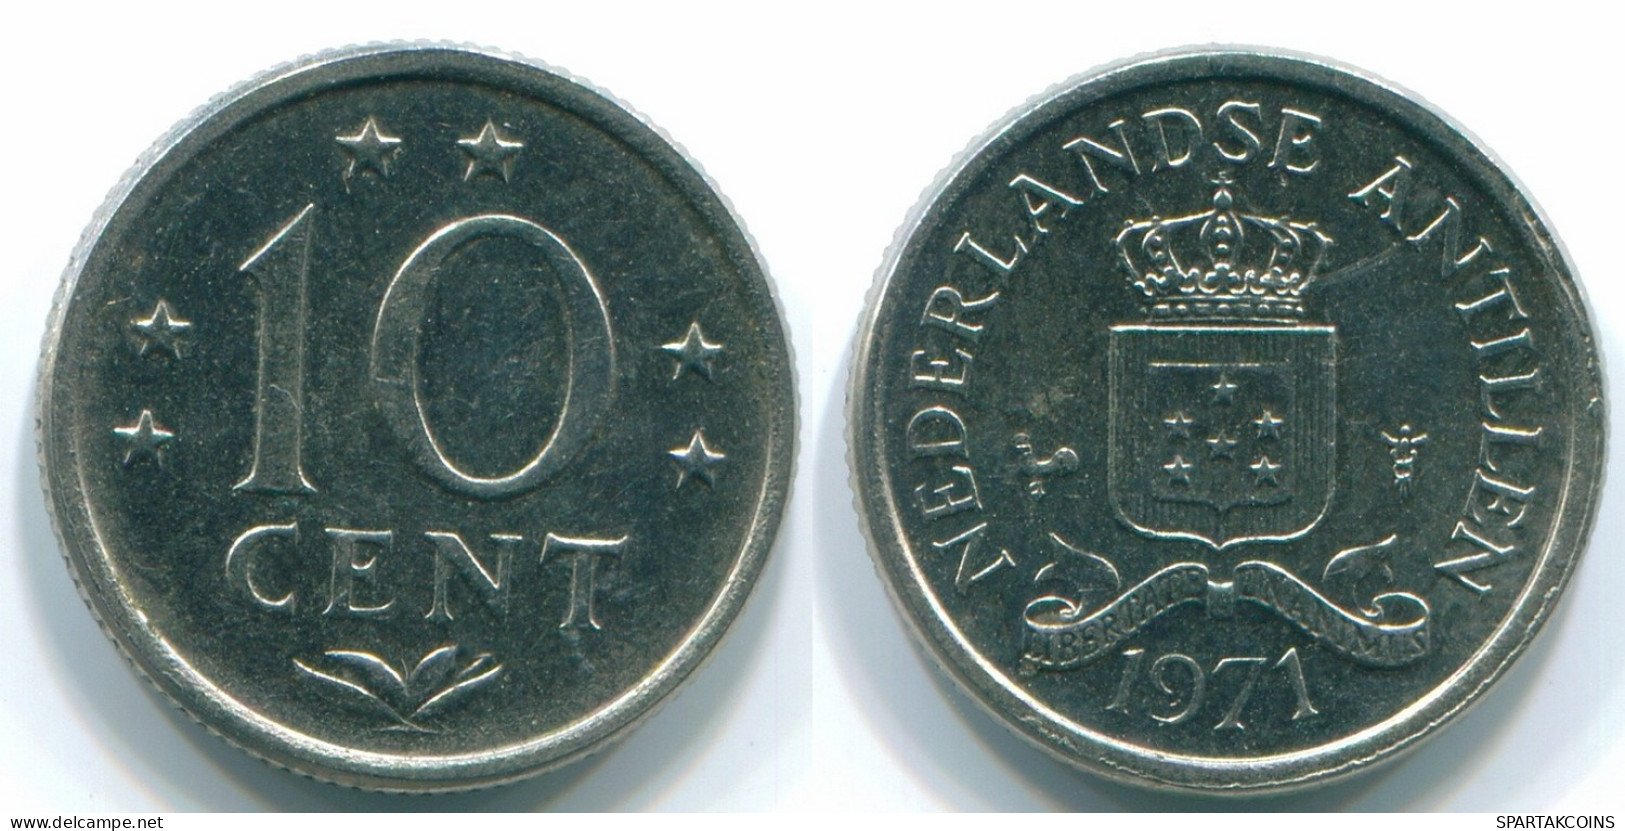 10 CENTS 1971 NETHERLANDS ANTILLES Nickel Colonial Coin #S13424.U.A - Netherlands Antilles